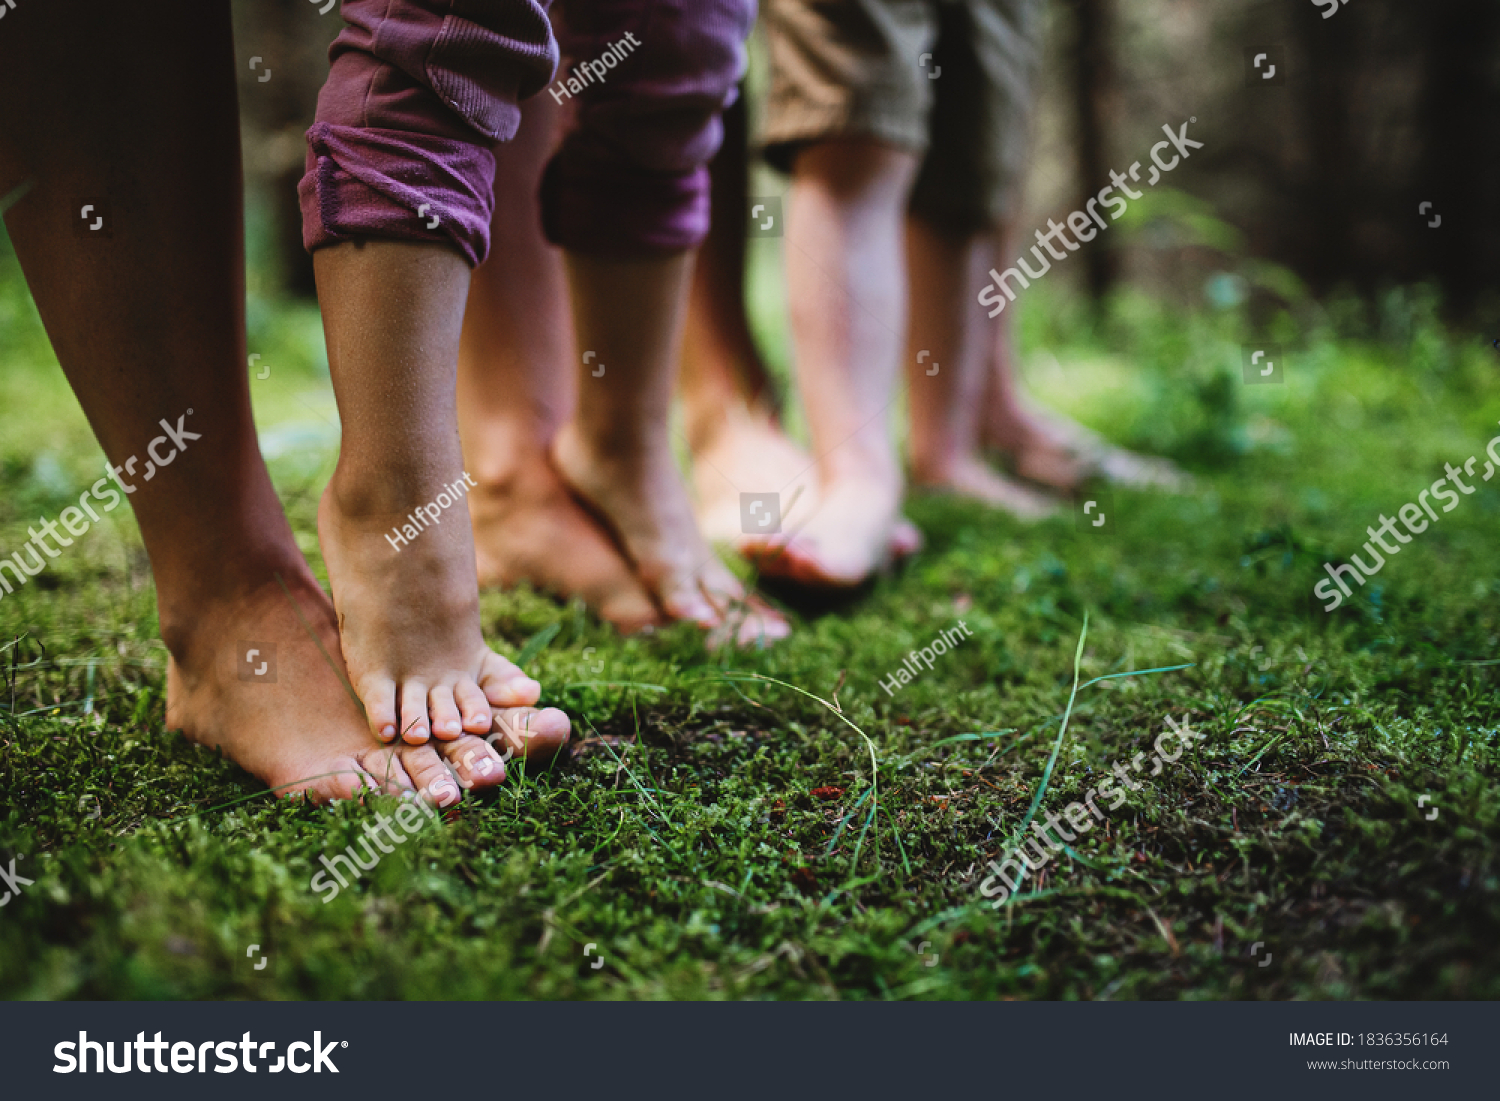 Bare feet of family with small children standing barefoot outdoors in nature, grounding concept. #1836356164